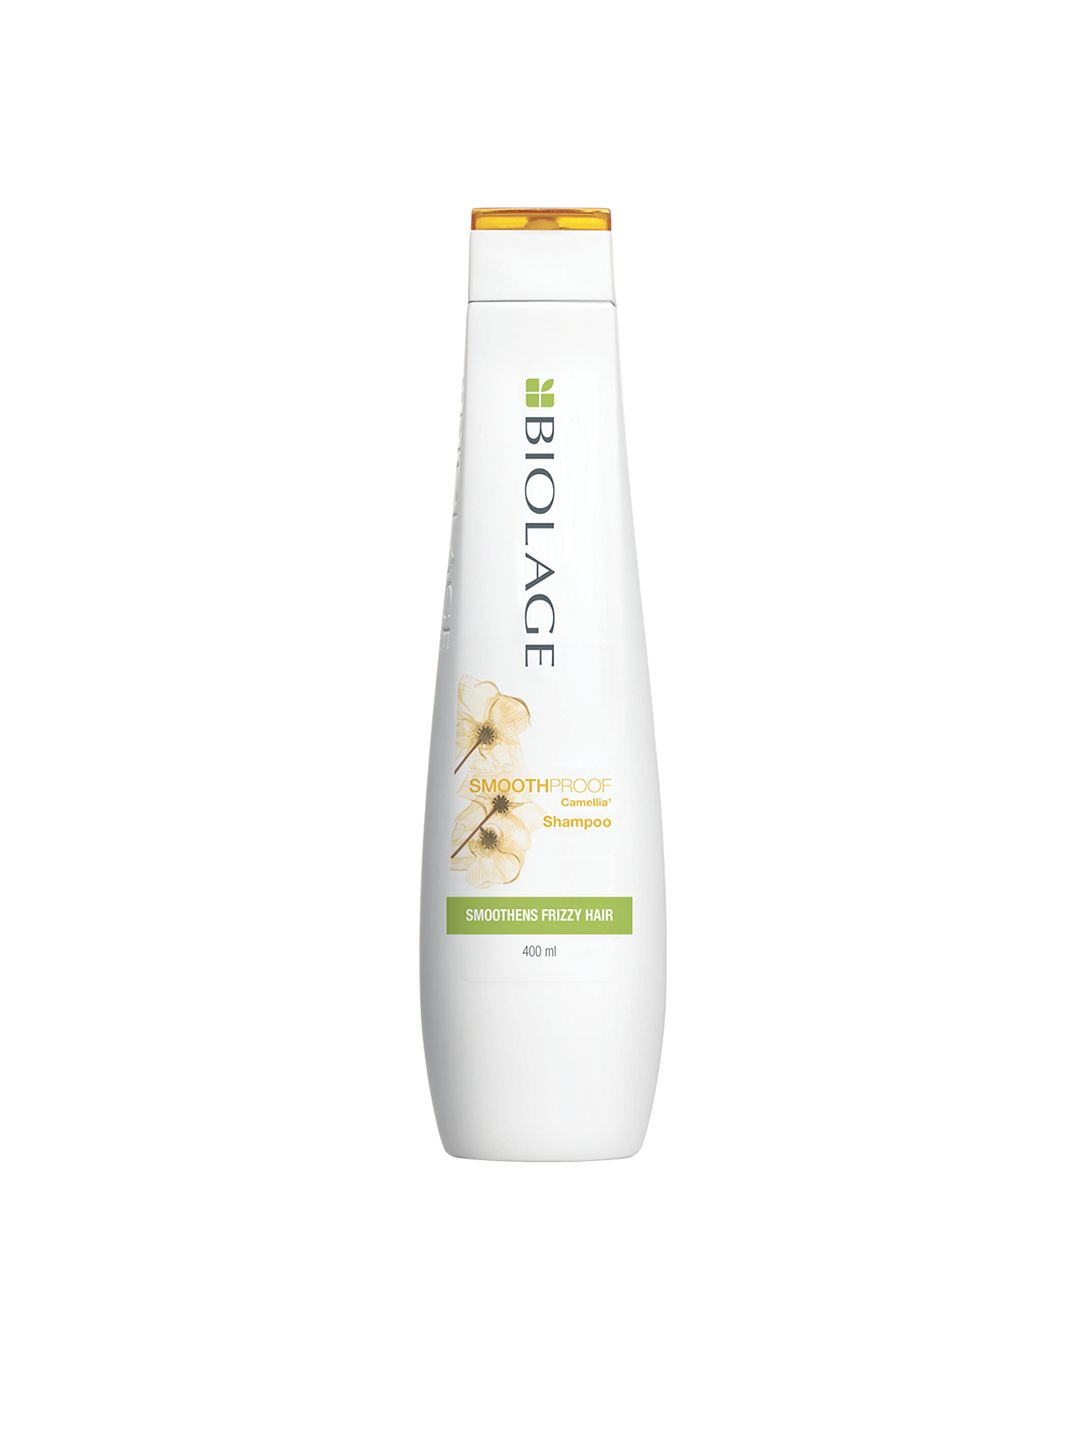 Biolage Smooth Proof Camellia Shampoo for Frizzy Hair - 400 ml Price in India